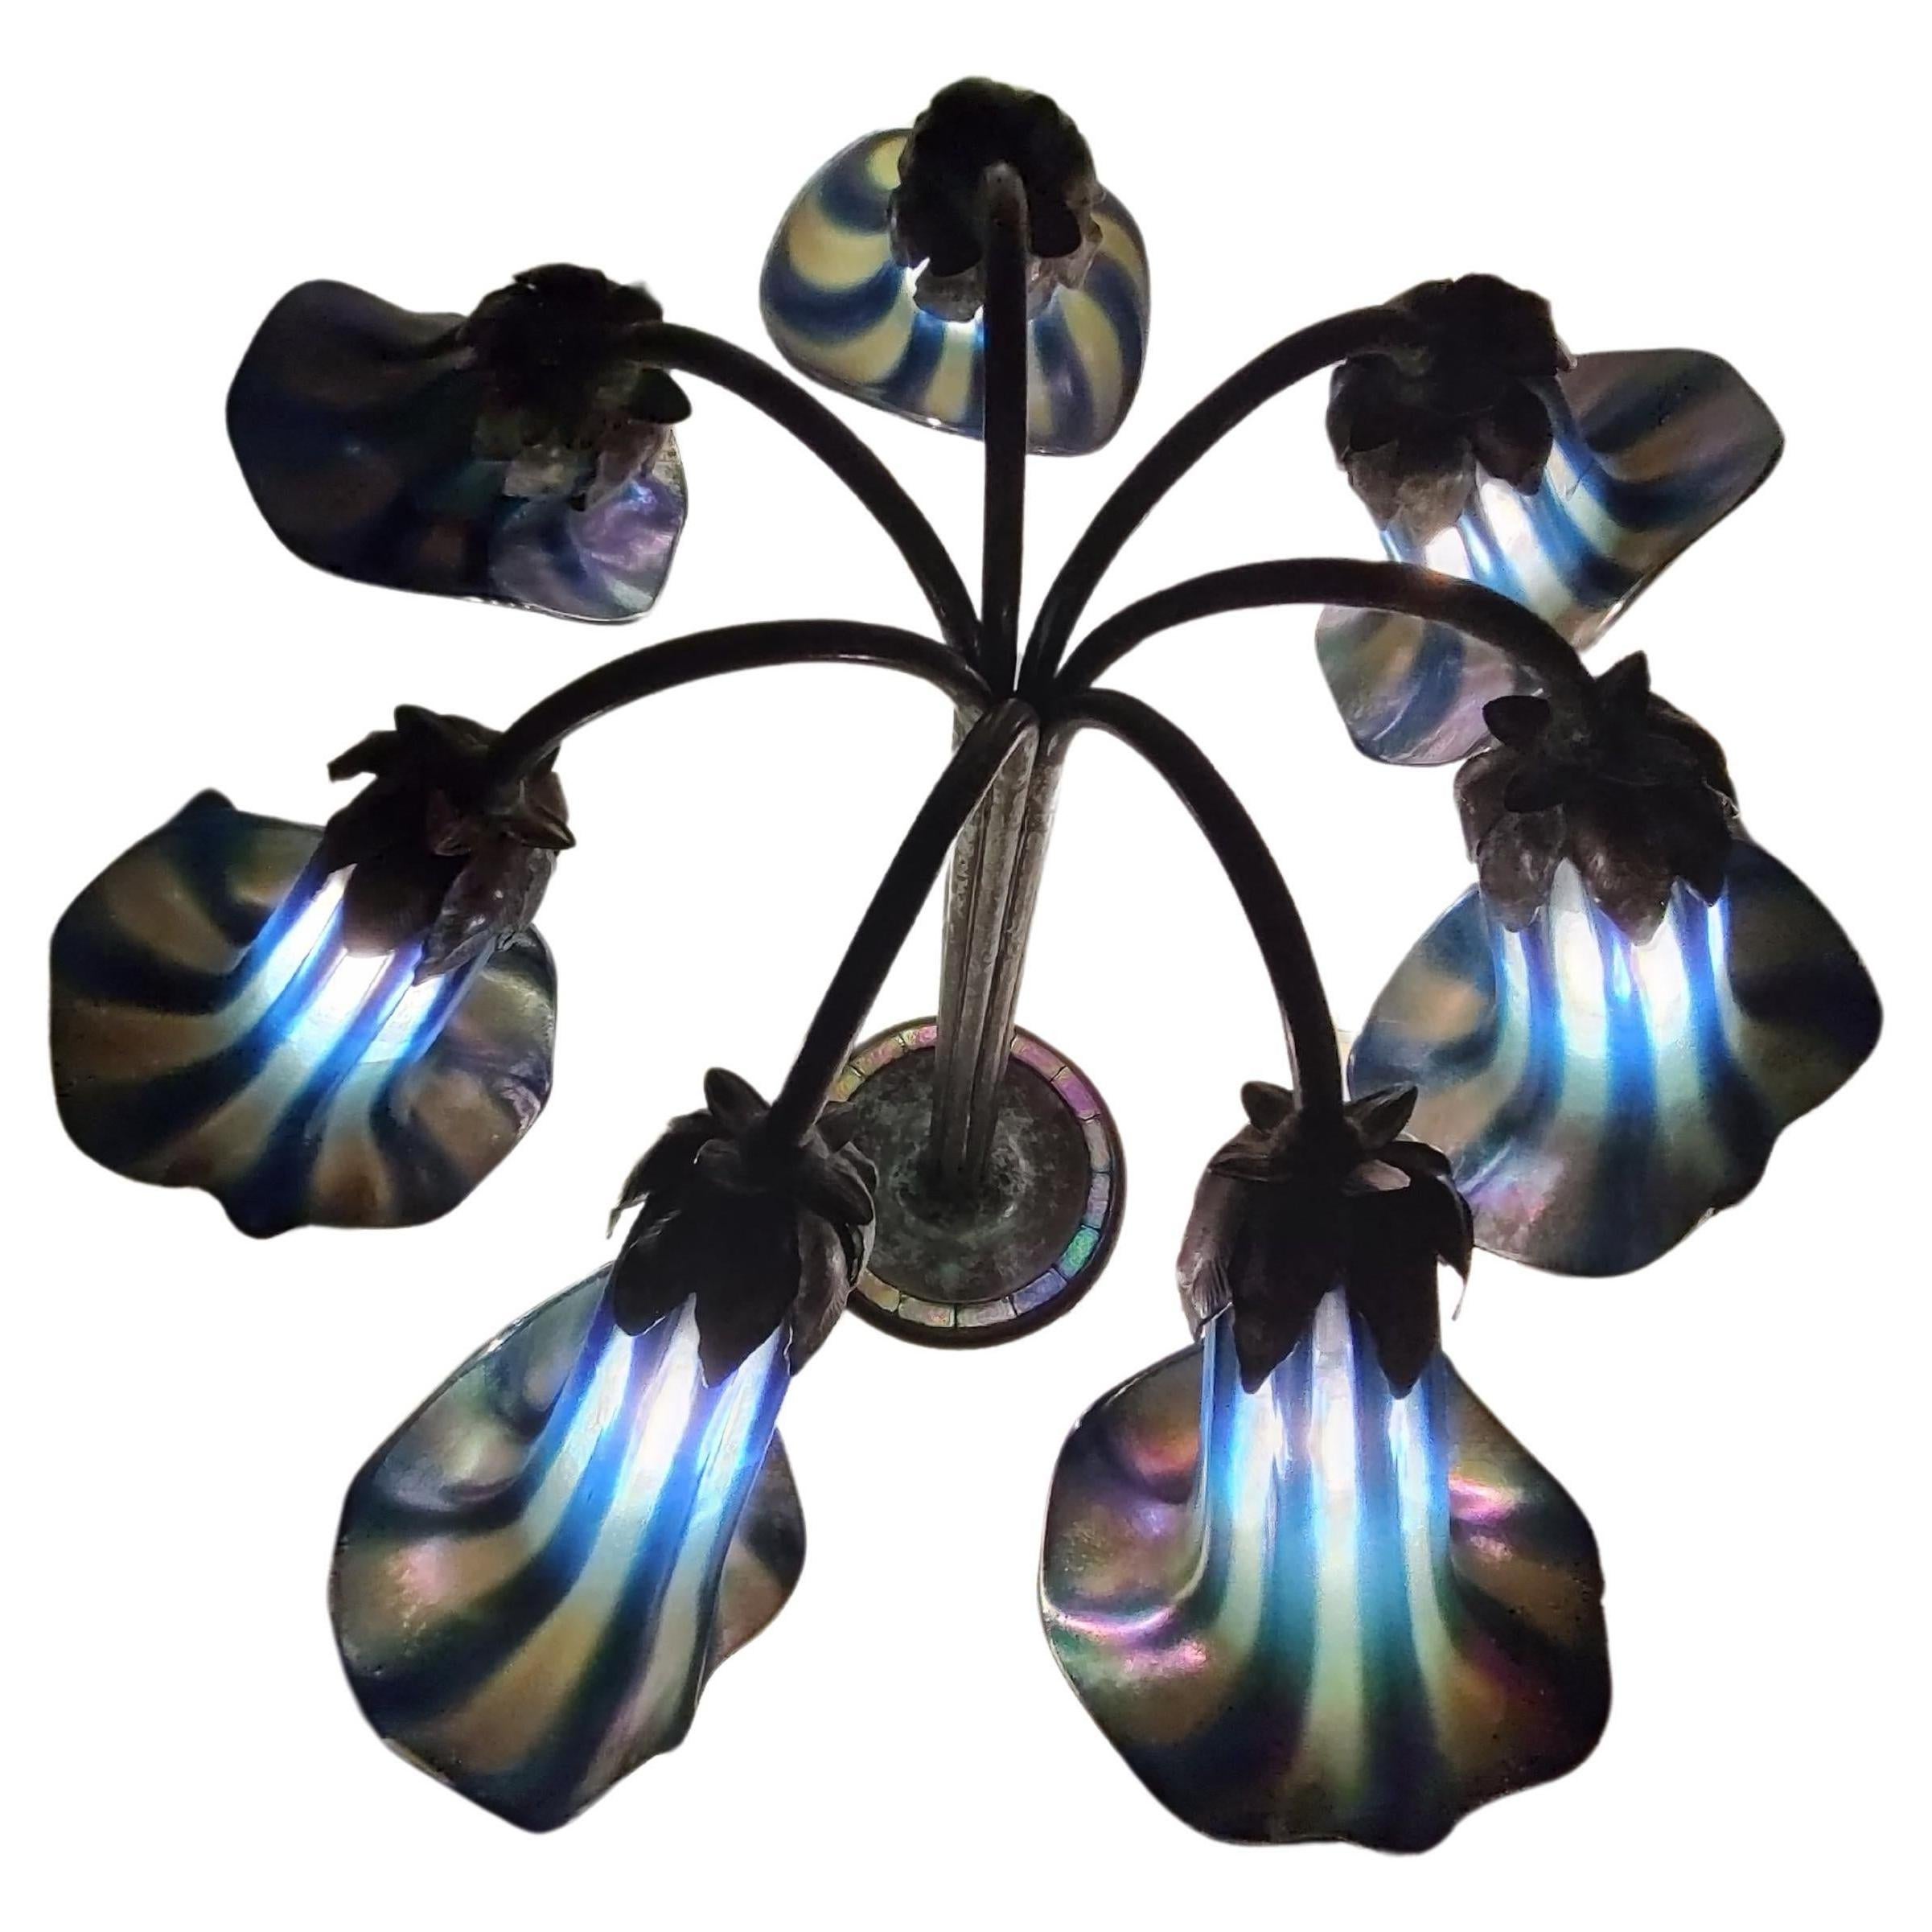 Fabulous colorful glass shades and in the base also. Hand crafted in bronze this seven light Lily lamp will undoubtedly enhance your room. Stamped Tiffany Studios New York. In excellent vintage condition with minimal wear.